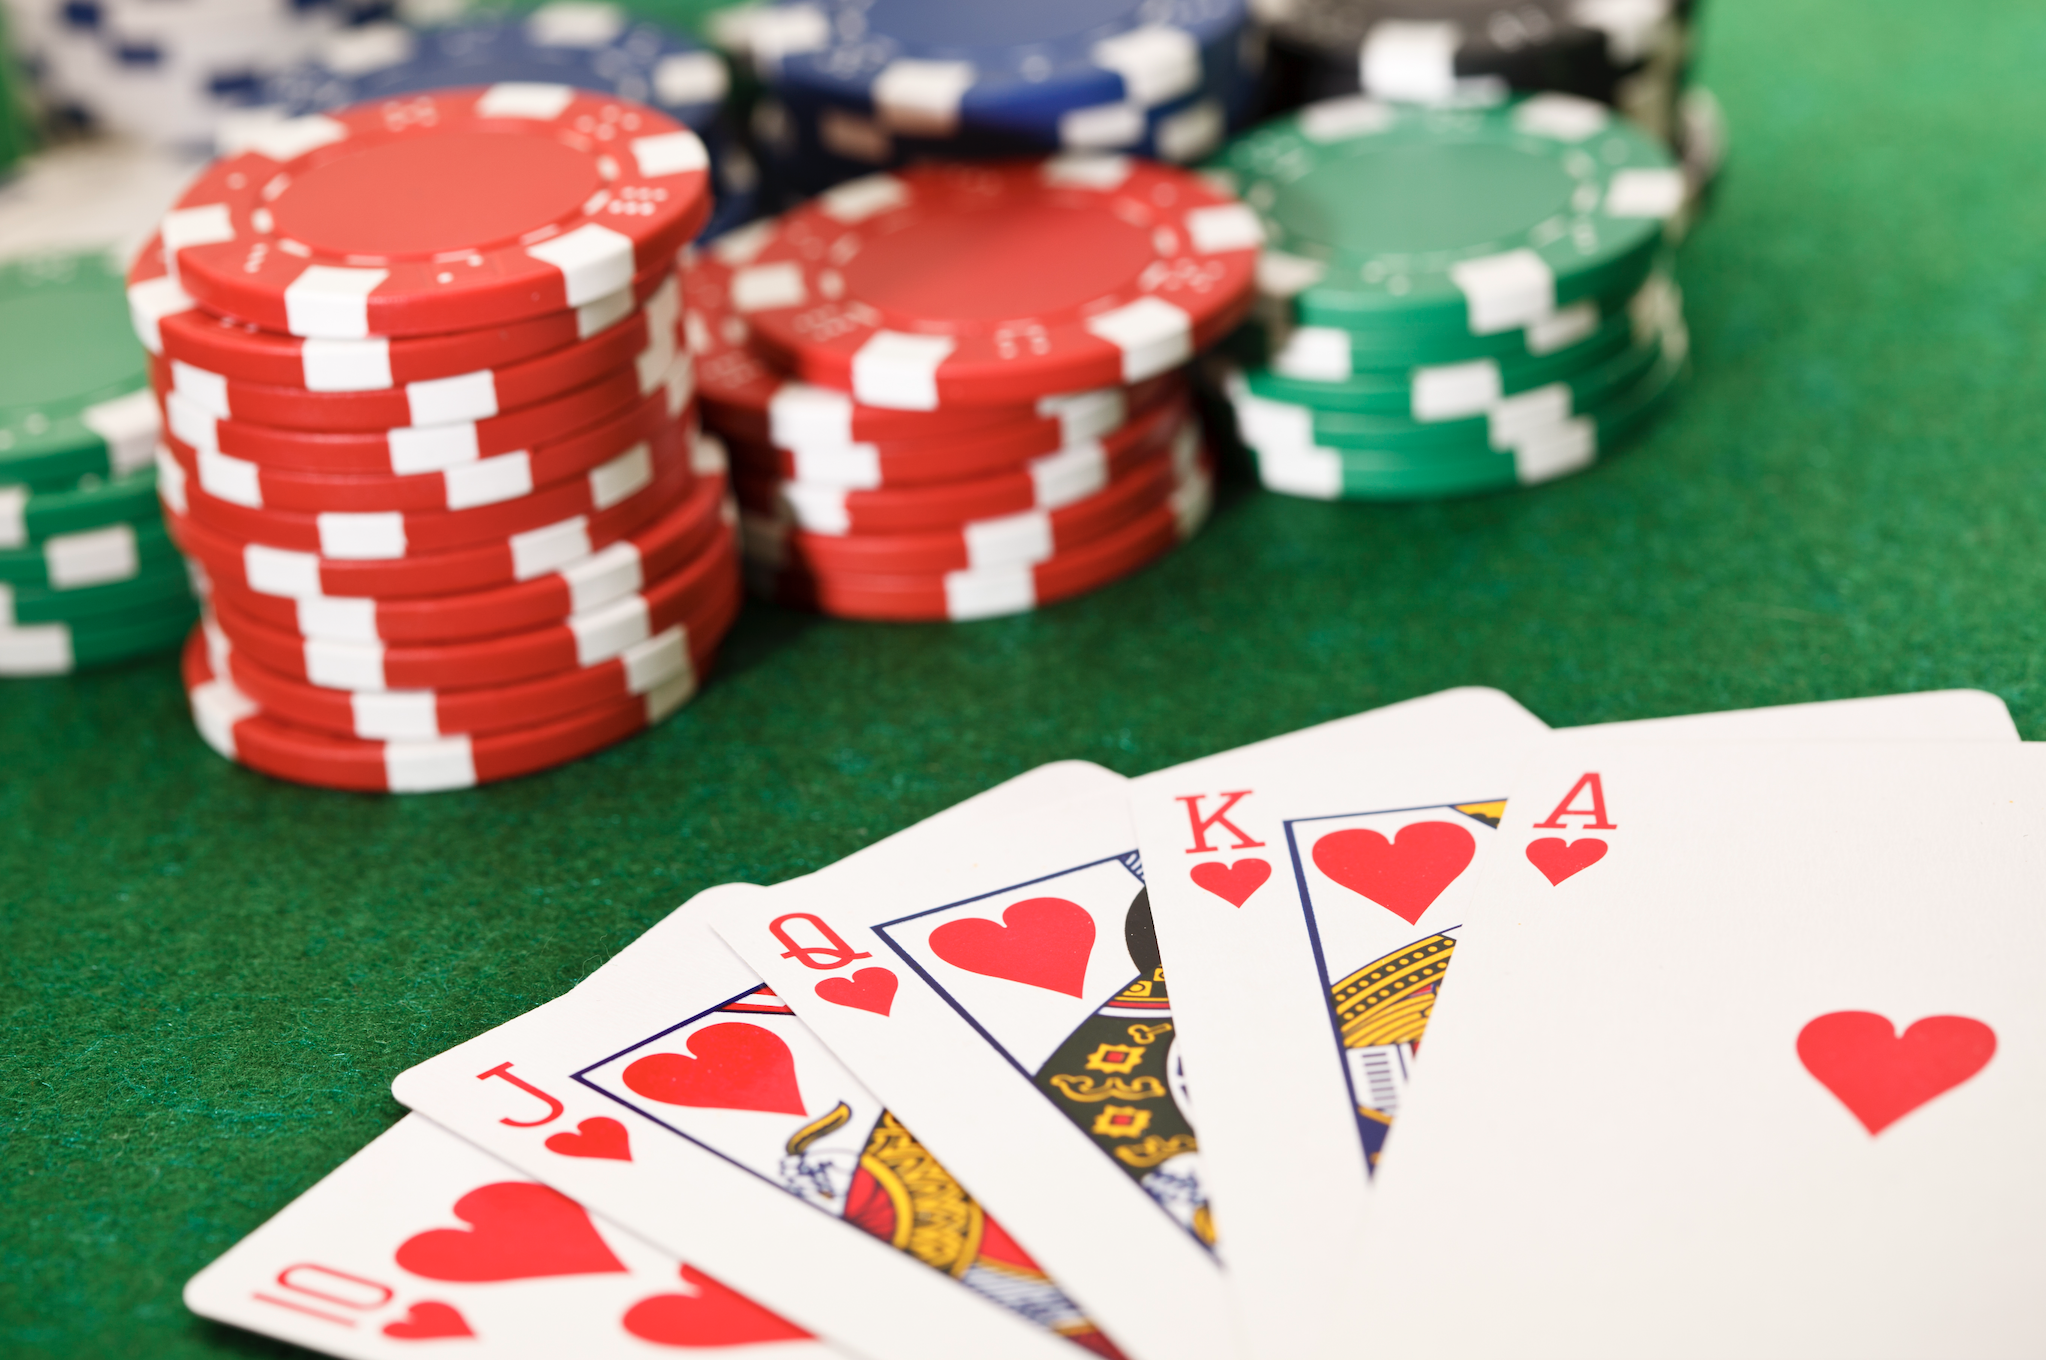 Poker hand with royal flush alongside poker chips on a table, implying financial risk and reward in gaming